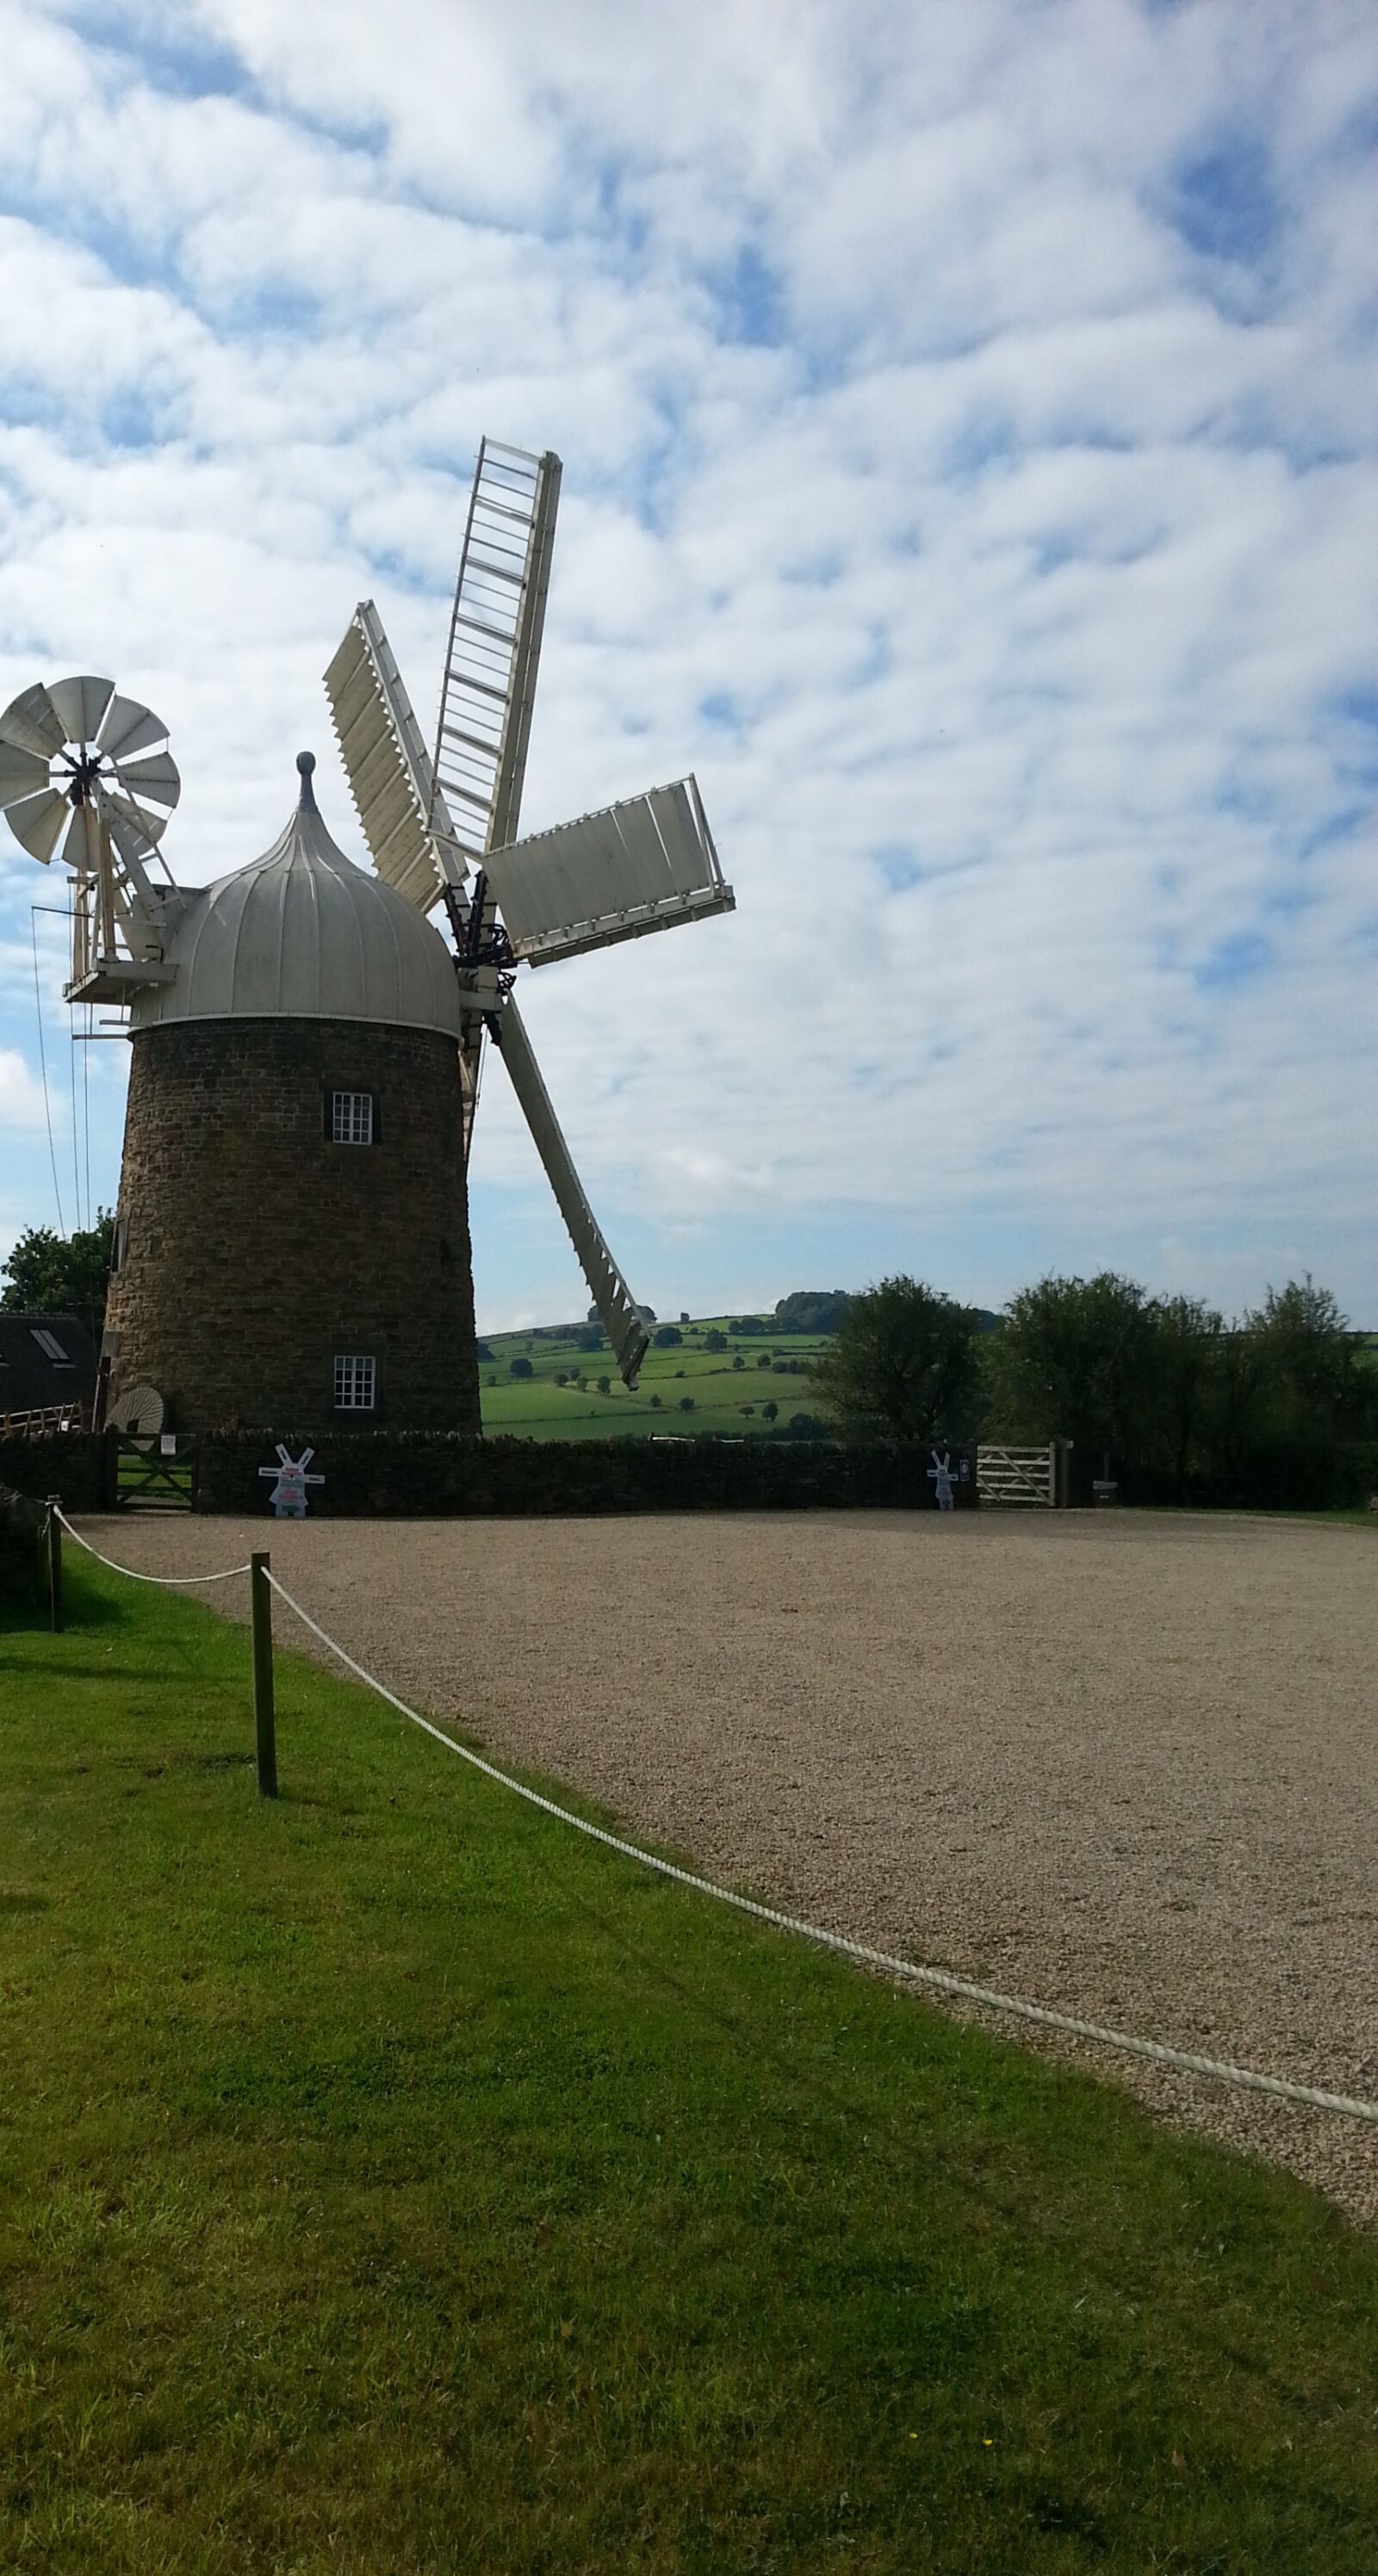 Samsung Galaxy S3 sample photo. Windmill, historic structure, countryside photography